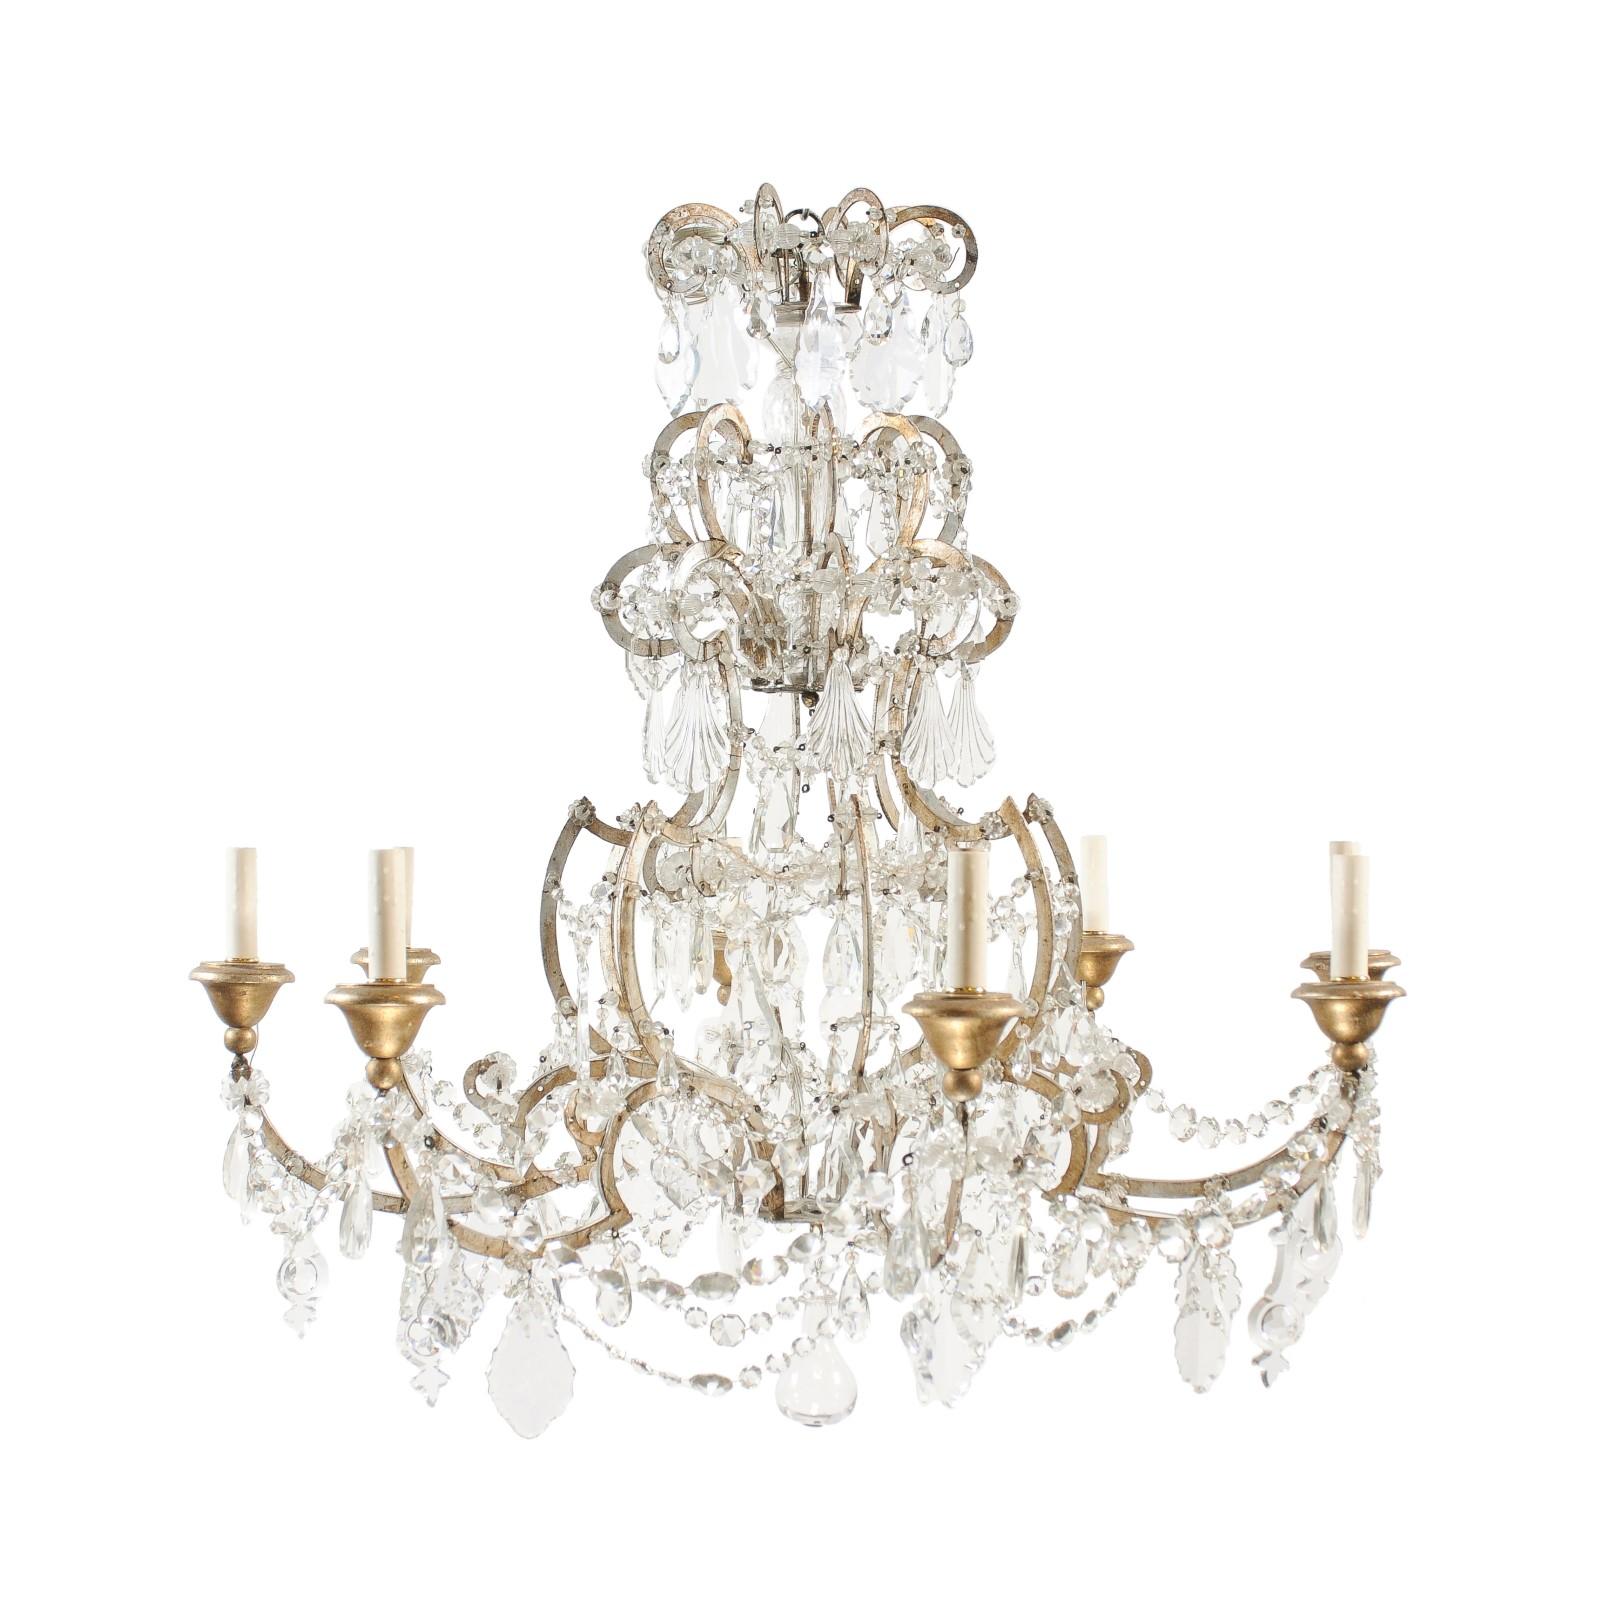 Italian Crystal & Silvered Wood Chandelier with 8 Lights, 19th Century In Good Condition For Sale In Atlanta, GA